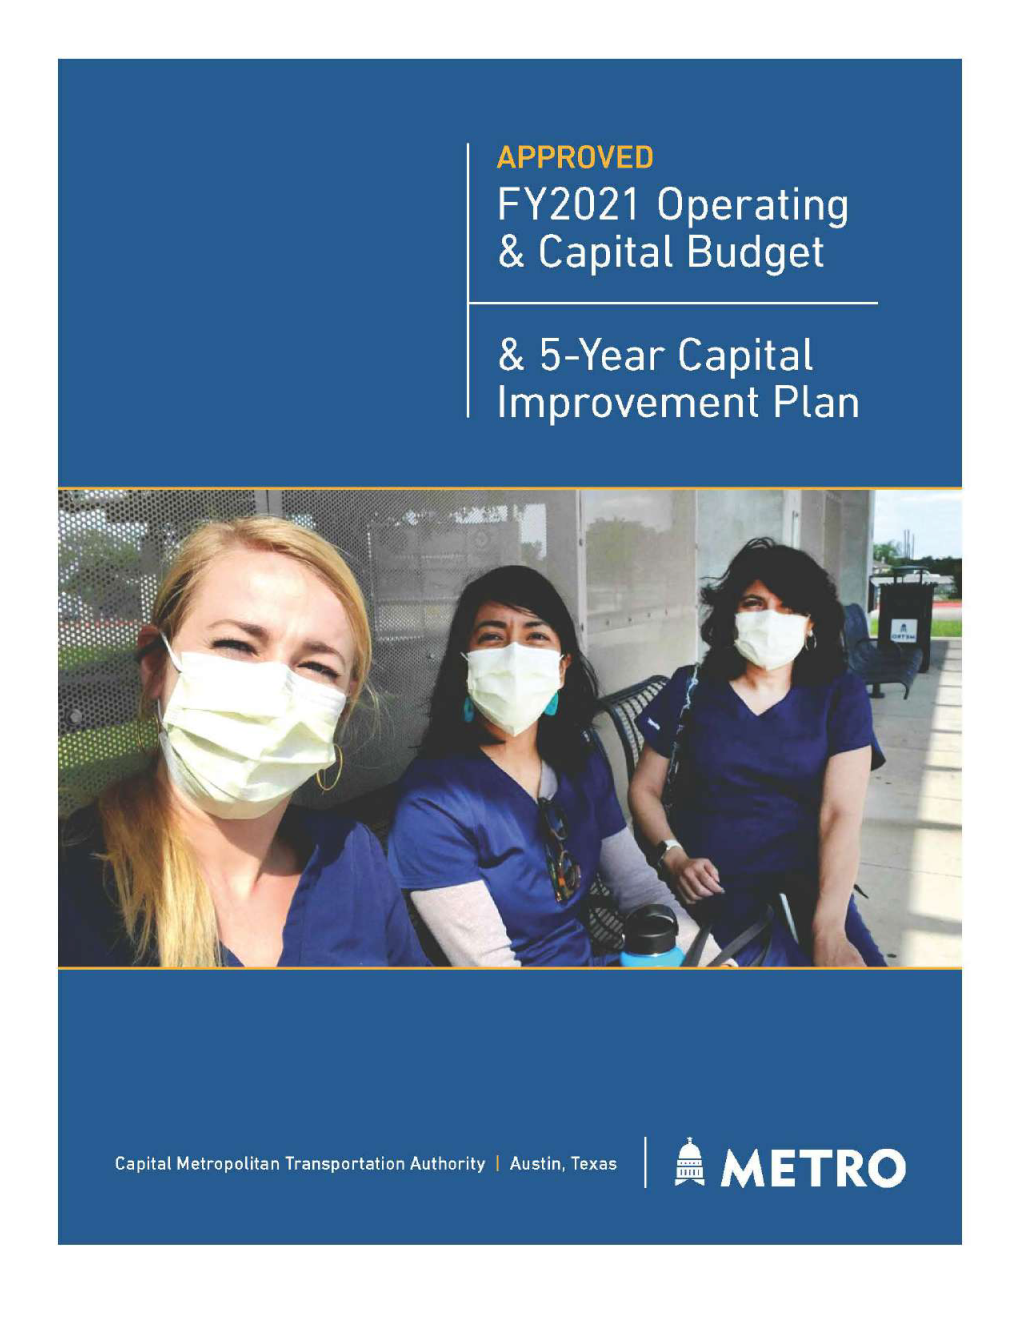 Approved FY2021 Operating and Capital Budget-Capital Metro